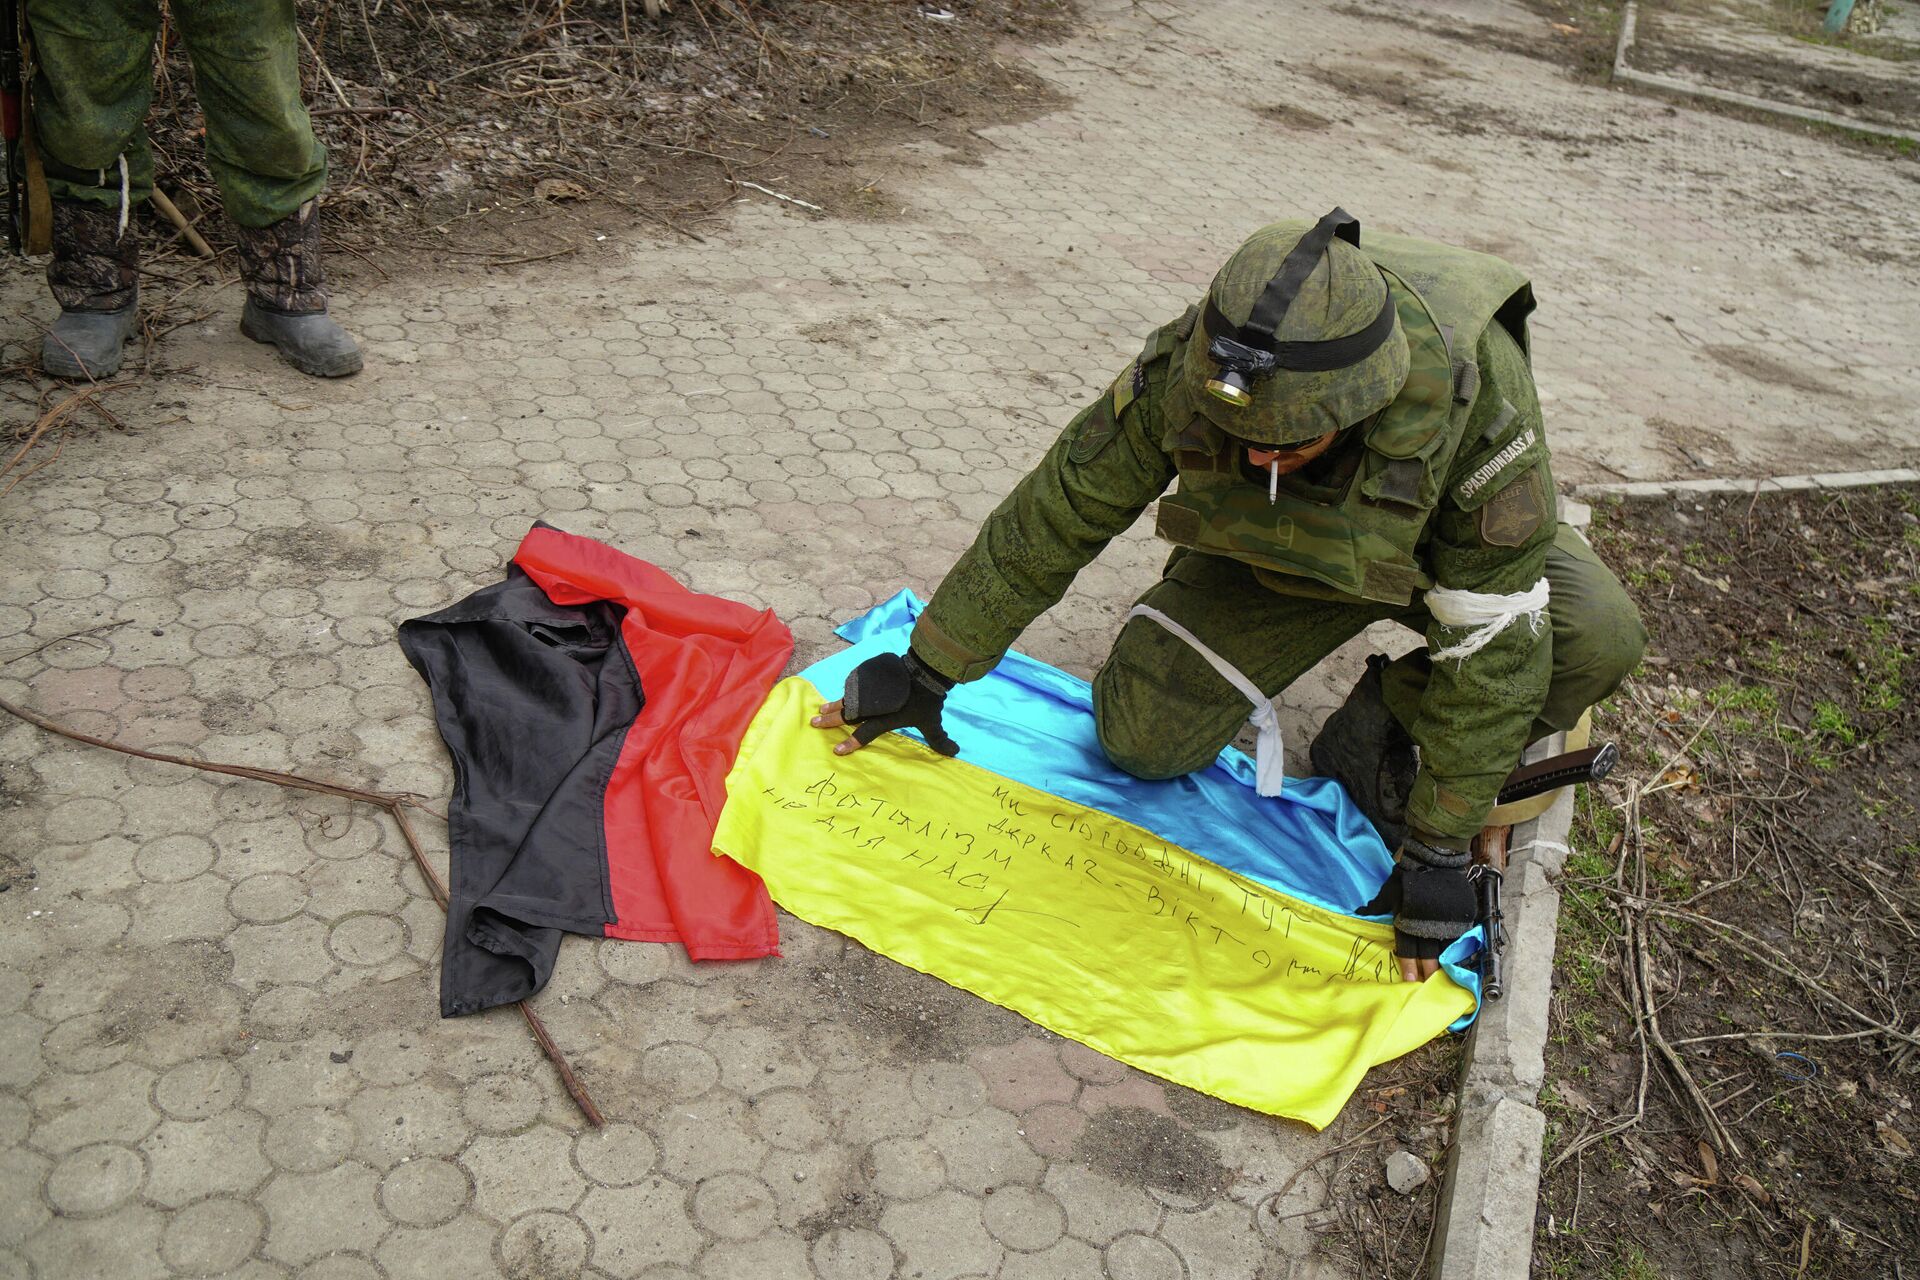 A serviceman of militia of Donetsk People's Republic (DPR) demonstrates flags of Ukraine and of Right Sector right-wing   radical group (banned in Russia) found in a camp of Ukrainian forces outside Mariupol, Ukraine - Sputnik International, 1920, 05.03.2022